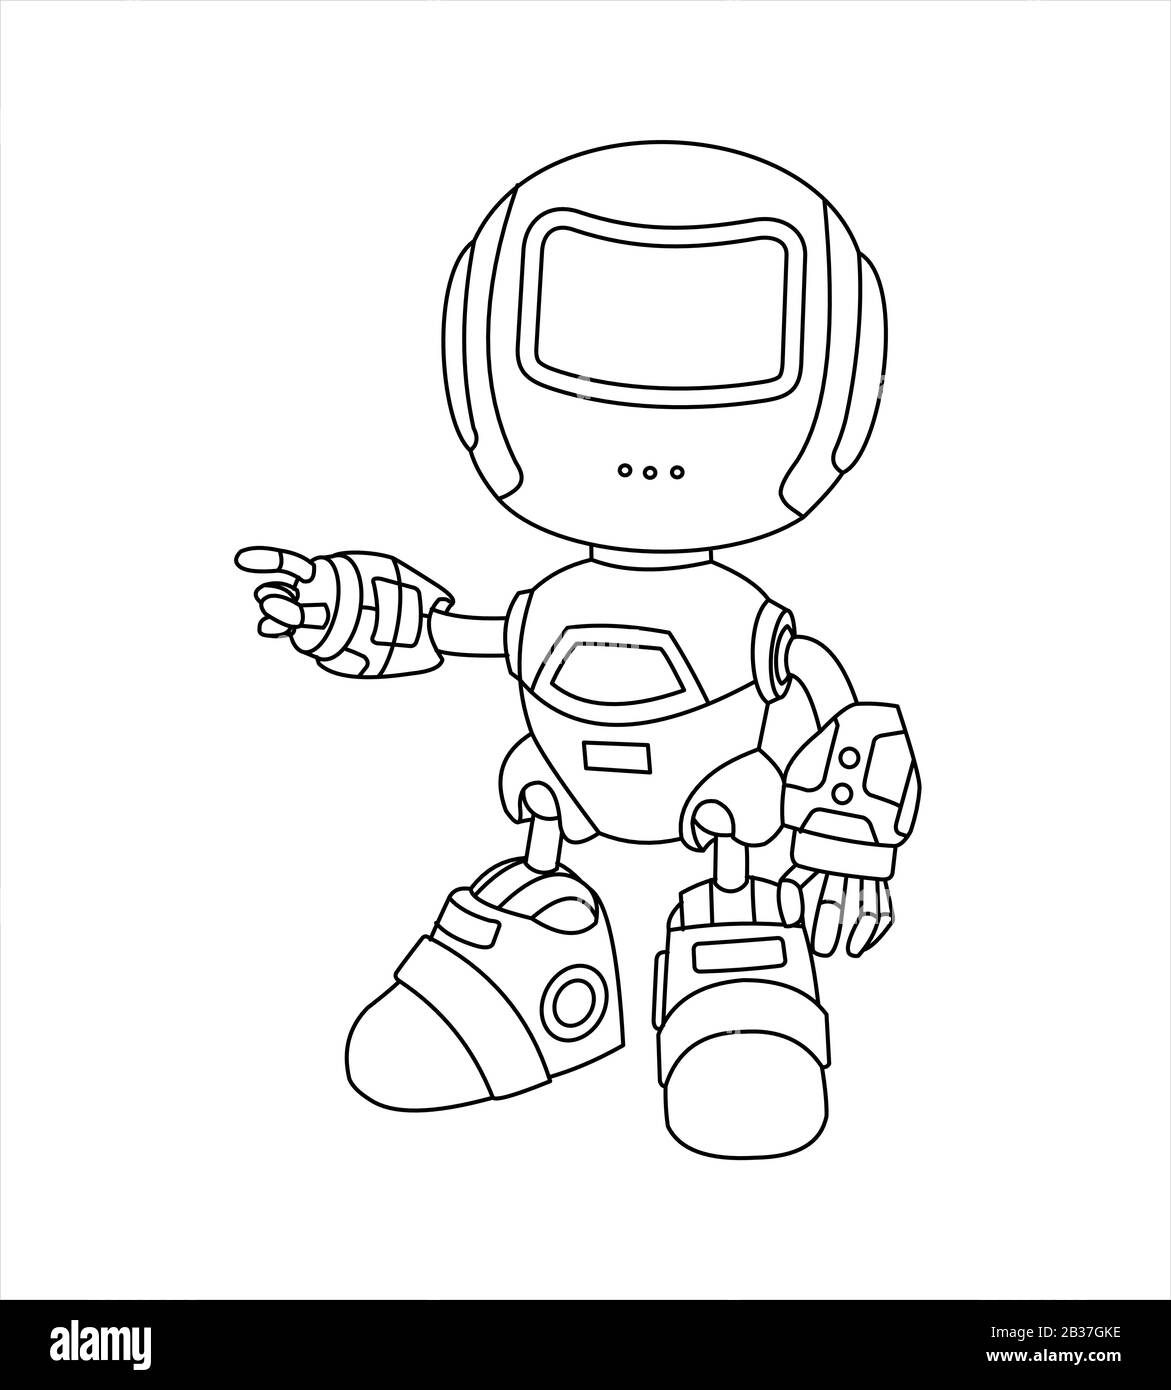 The robot, drawn by a line, shows a hand to the side, points to something. Stock Vector